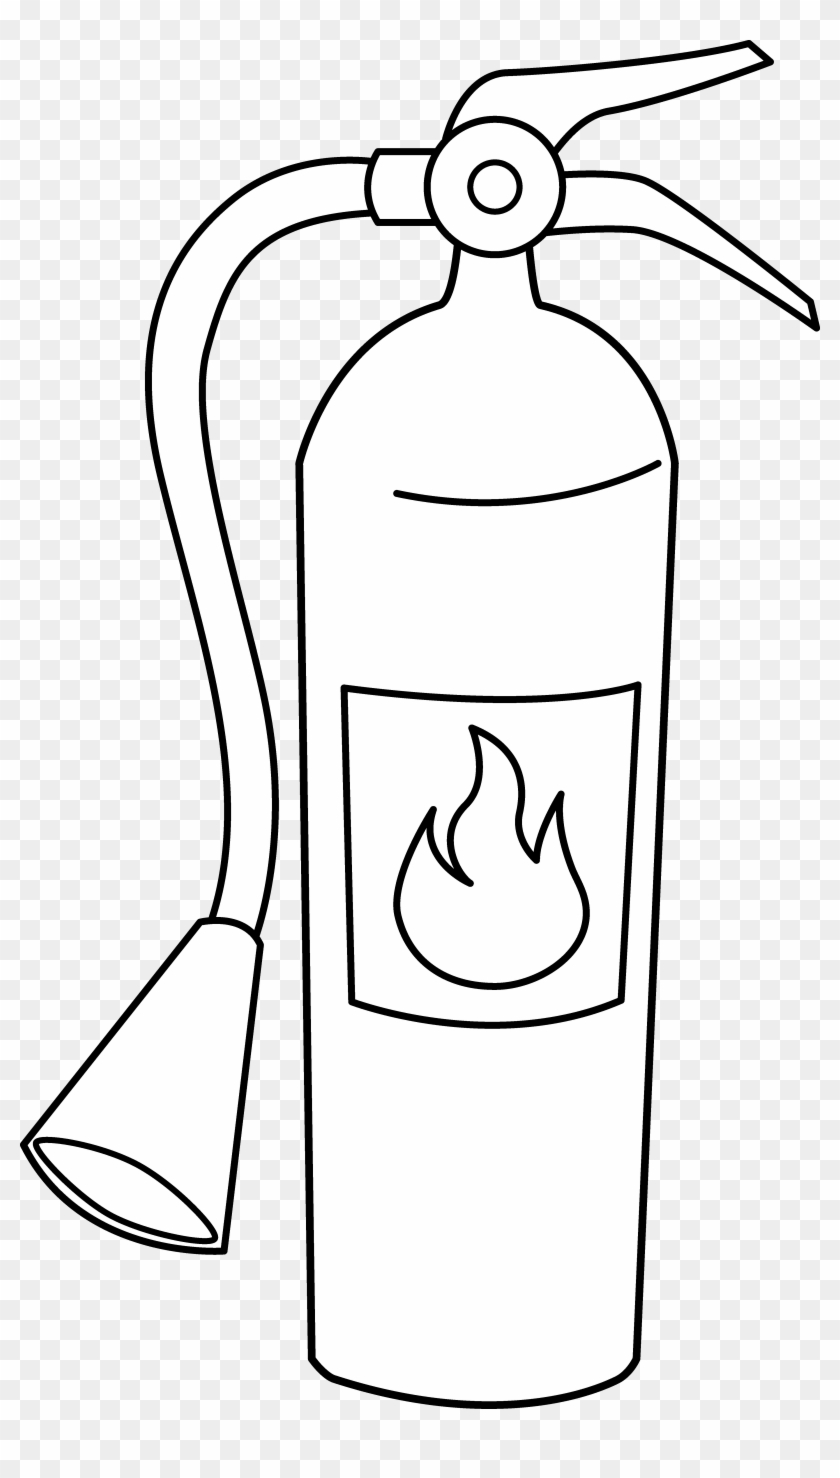 Fire Clipart Black And White Draw A Fire Extinguisher Free Transparent Png Clipart Images Download